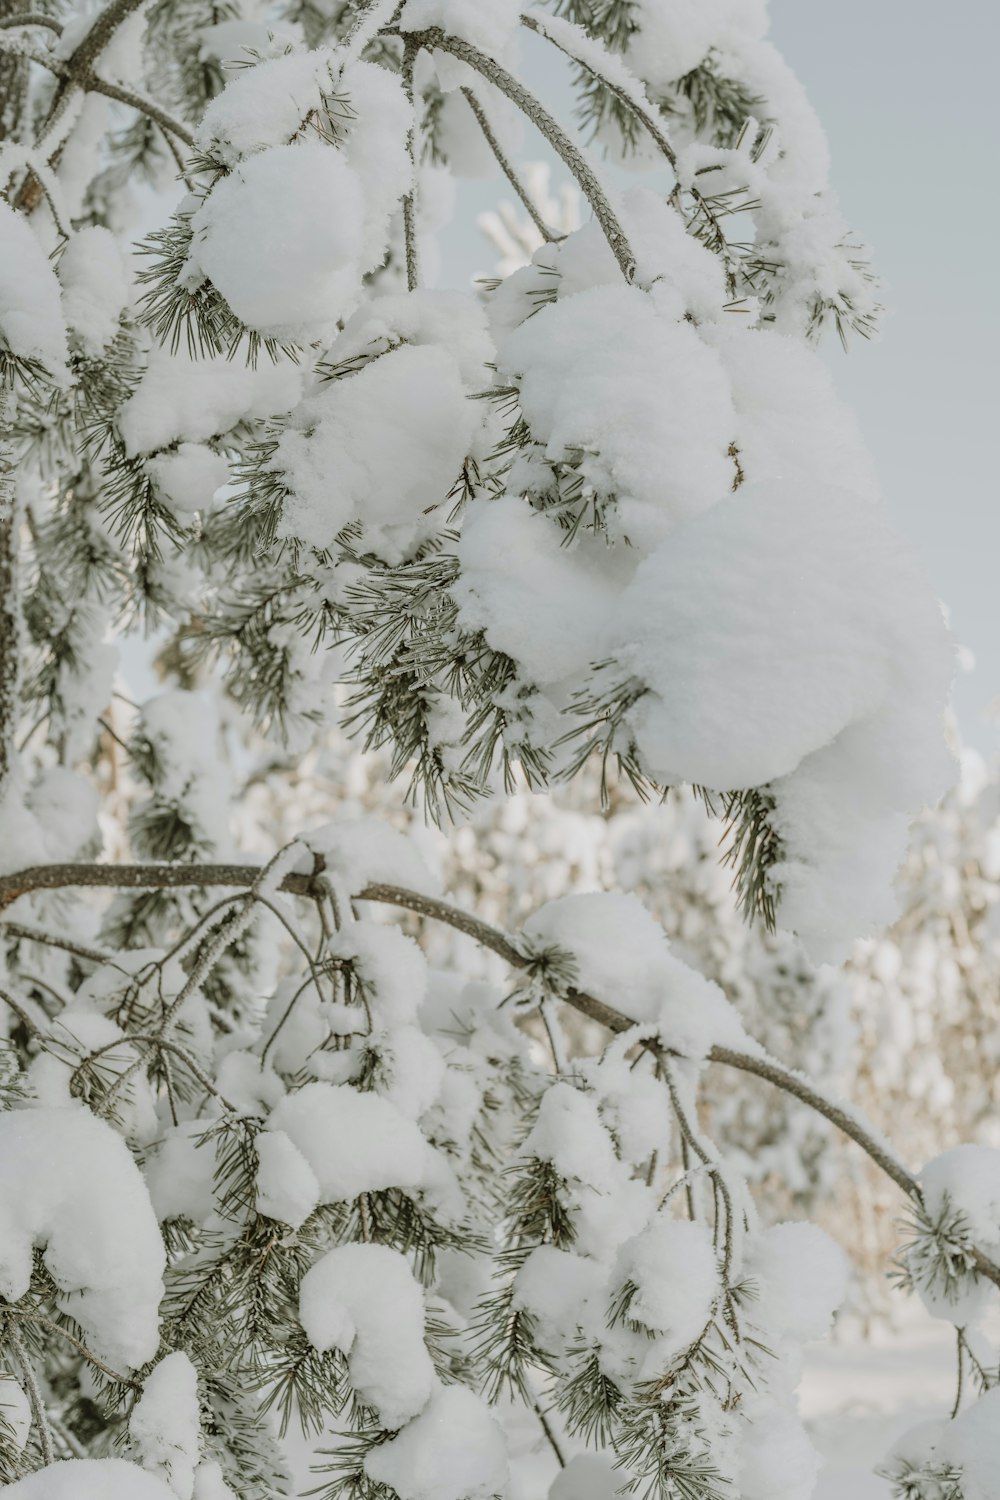 a pine tree covered in snow with lots of snow on it